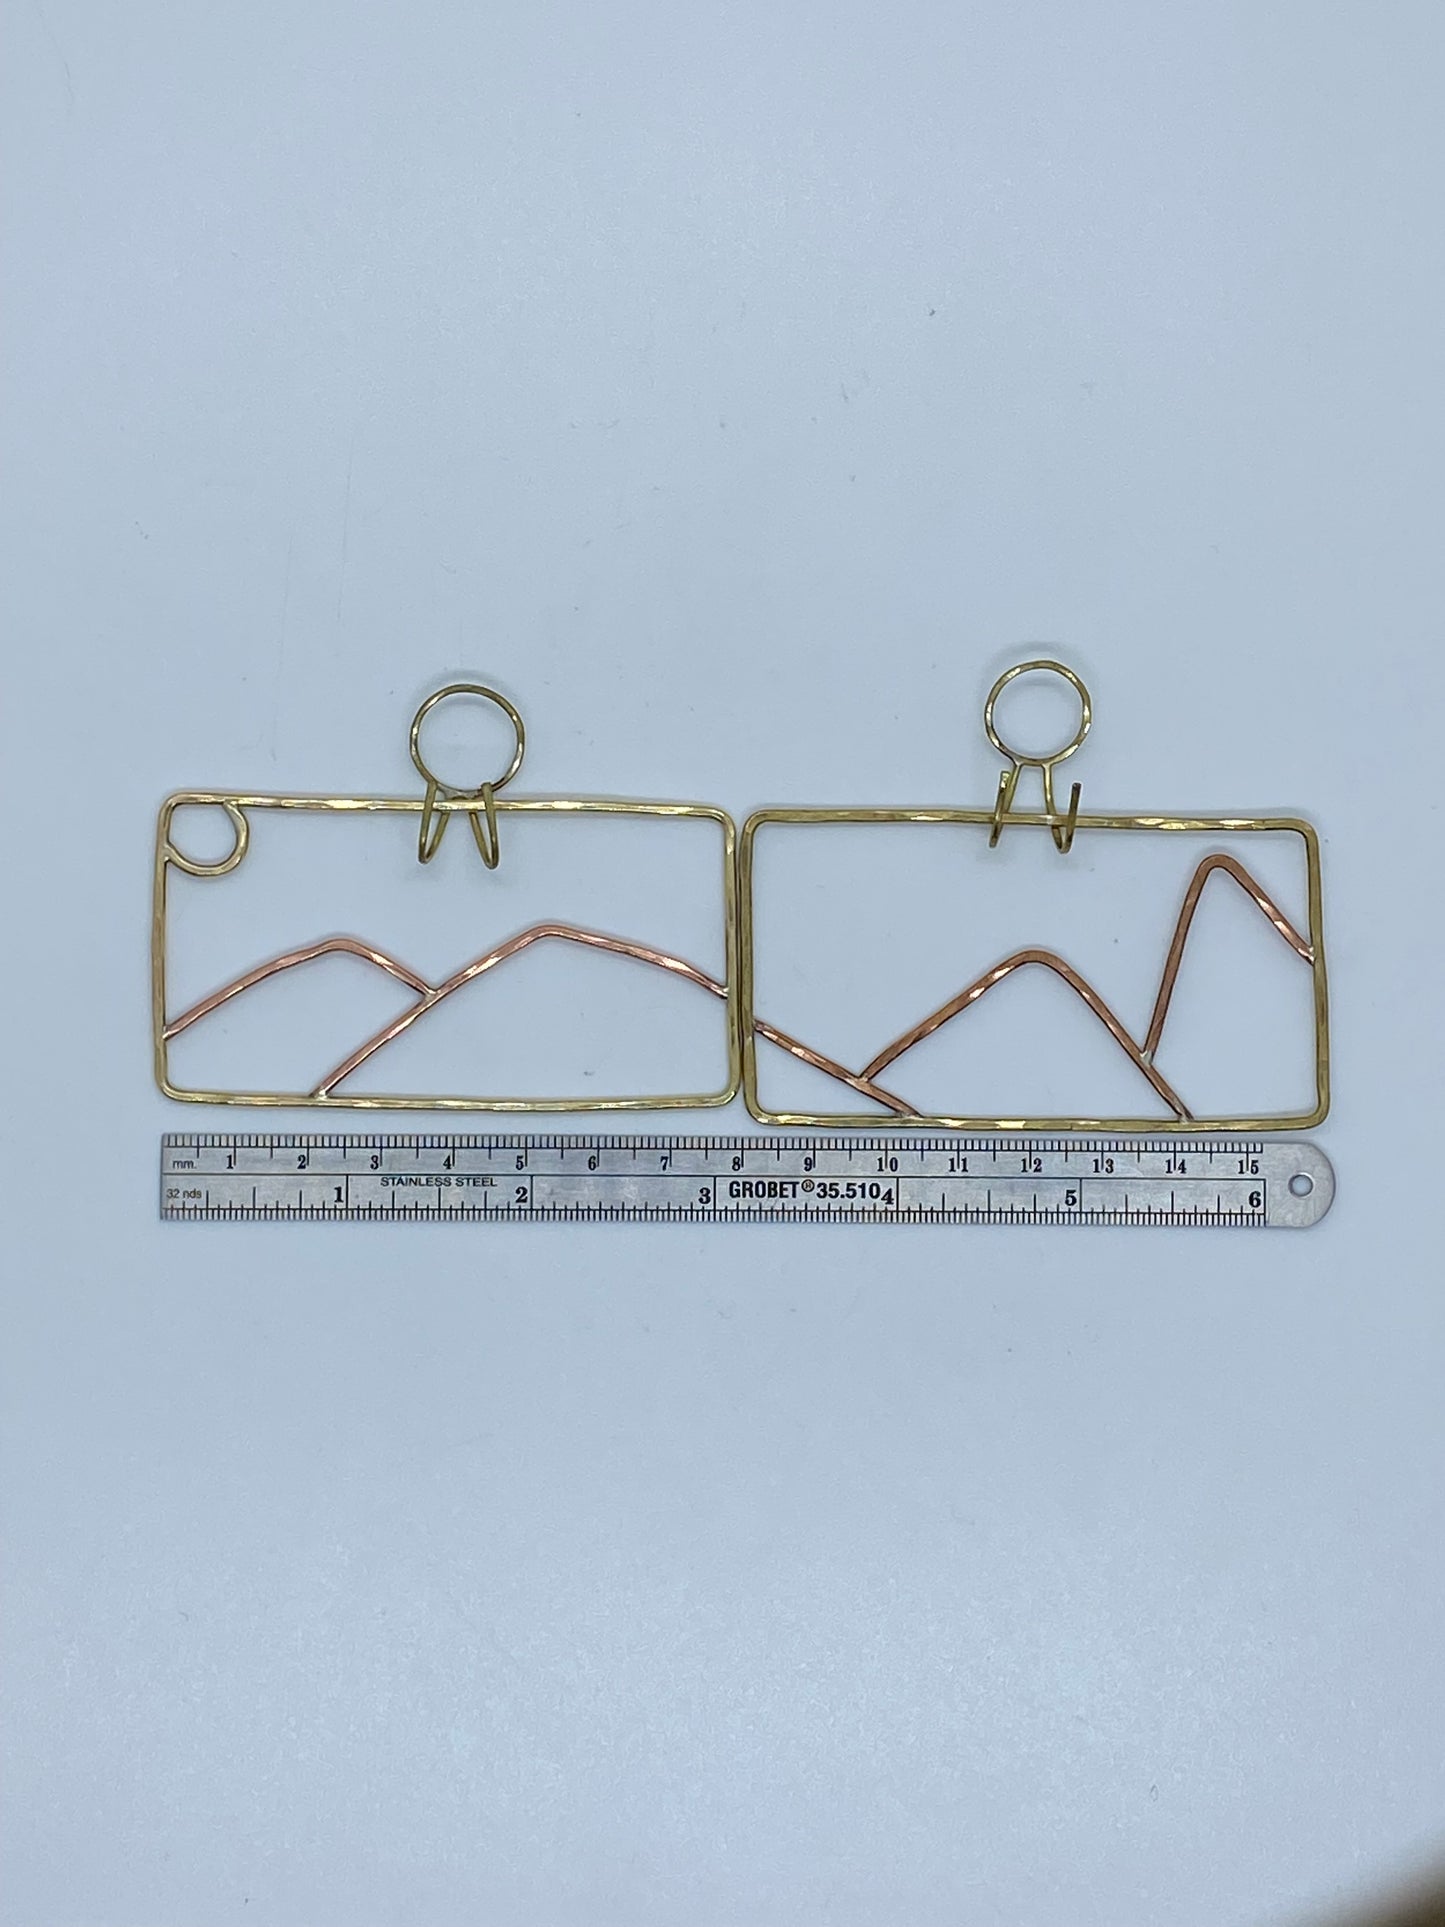 Miniature Small Mountains and Moon Landscape Wall Hanging - Brass and Copper Wall Decor Set